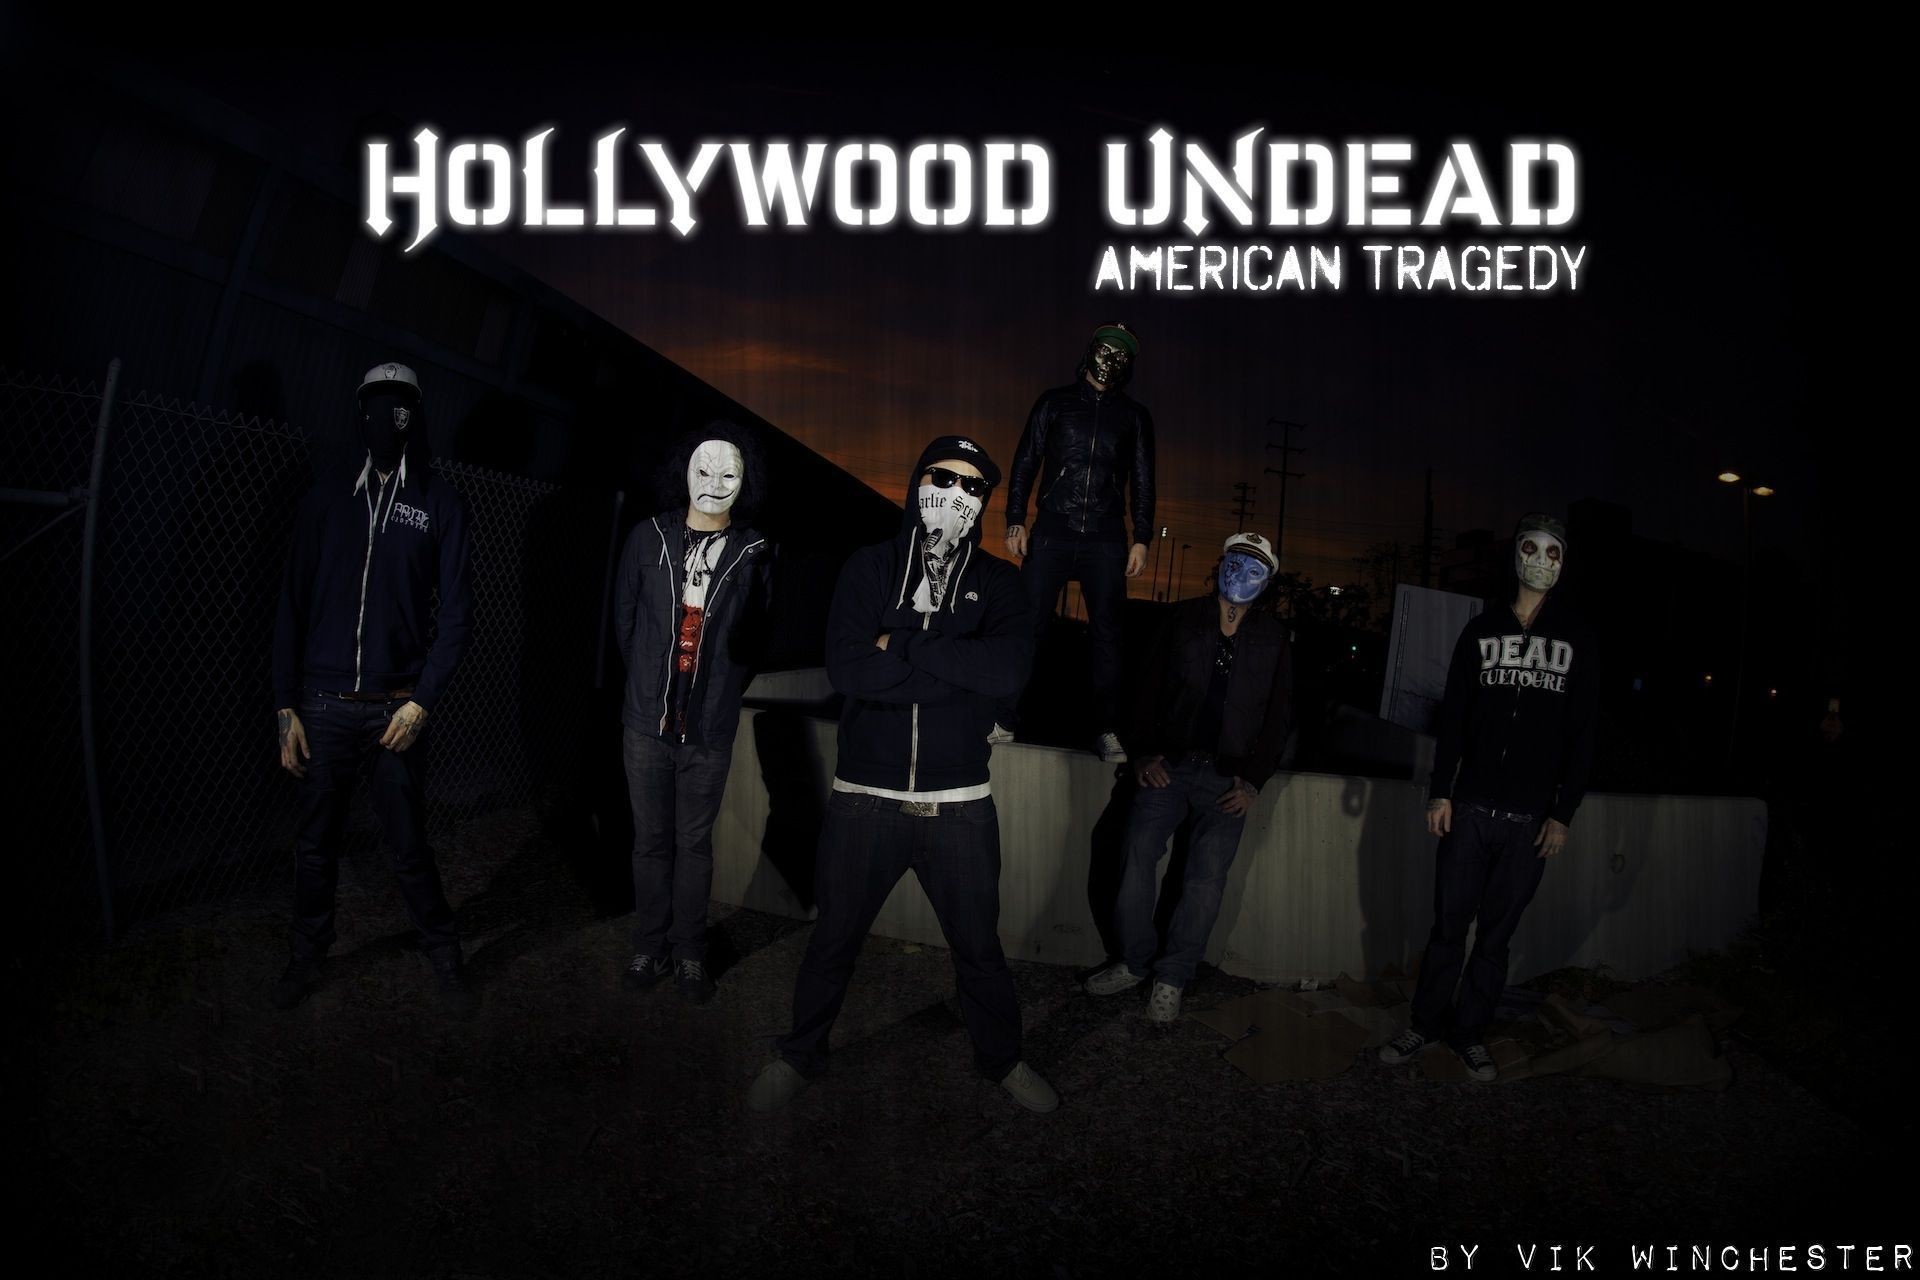 Hollywood Undead Wallpaper for iPhone 60 images